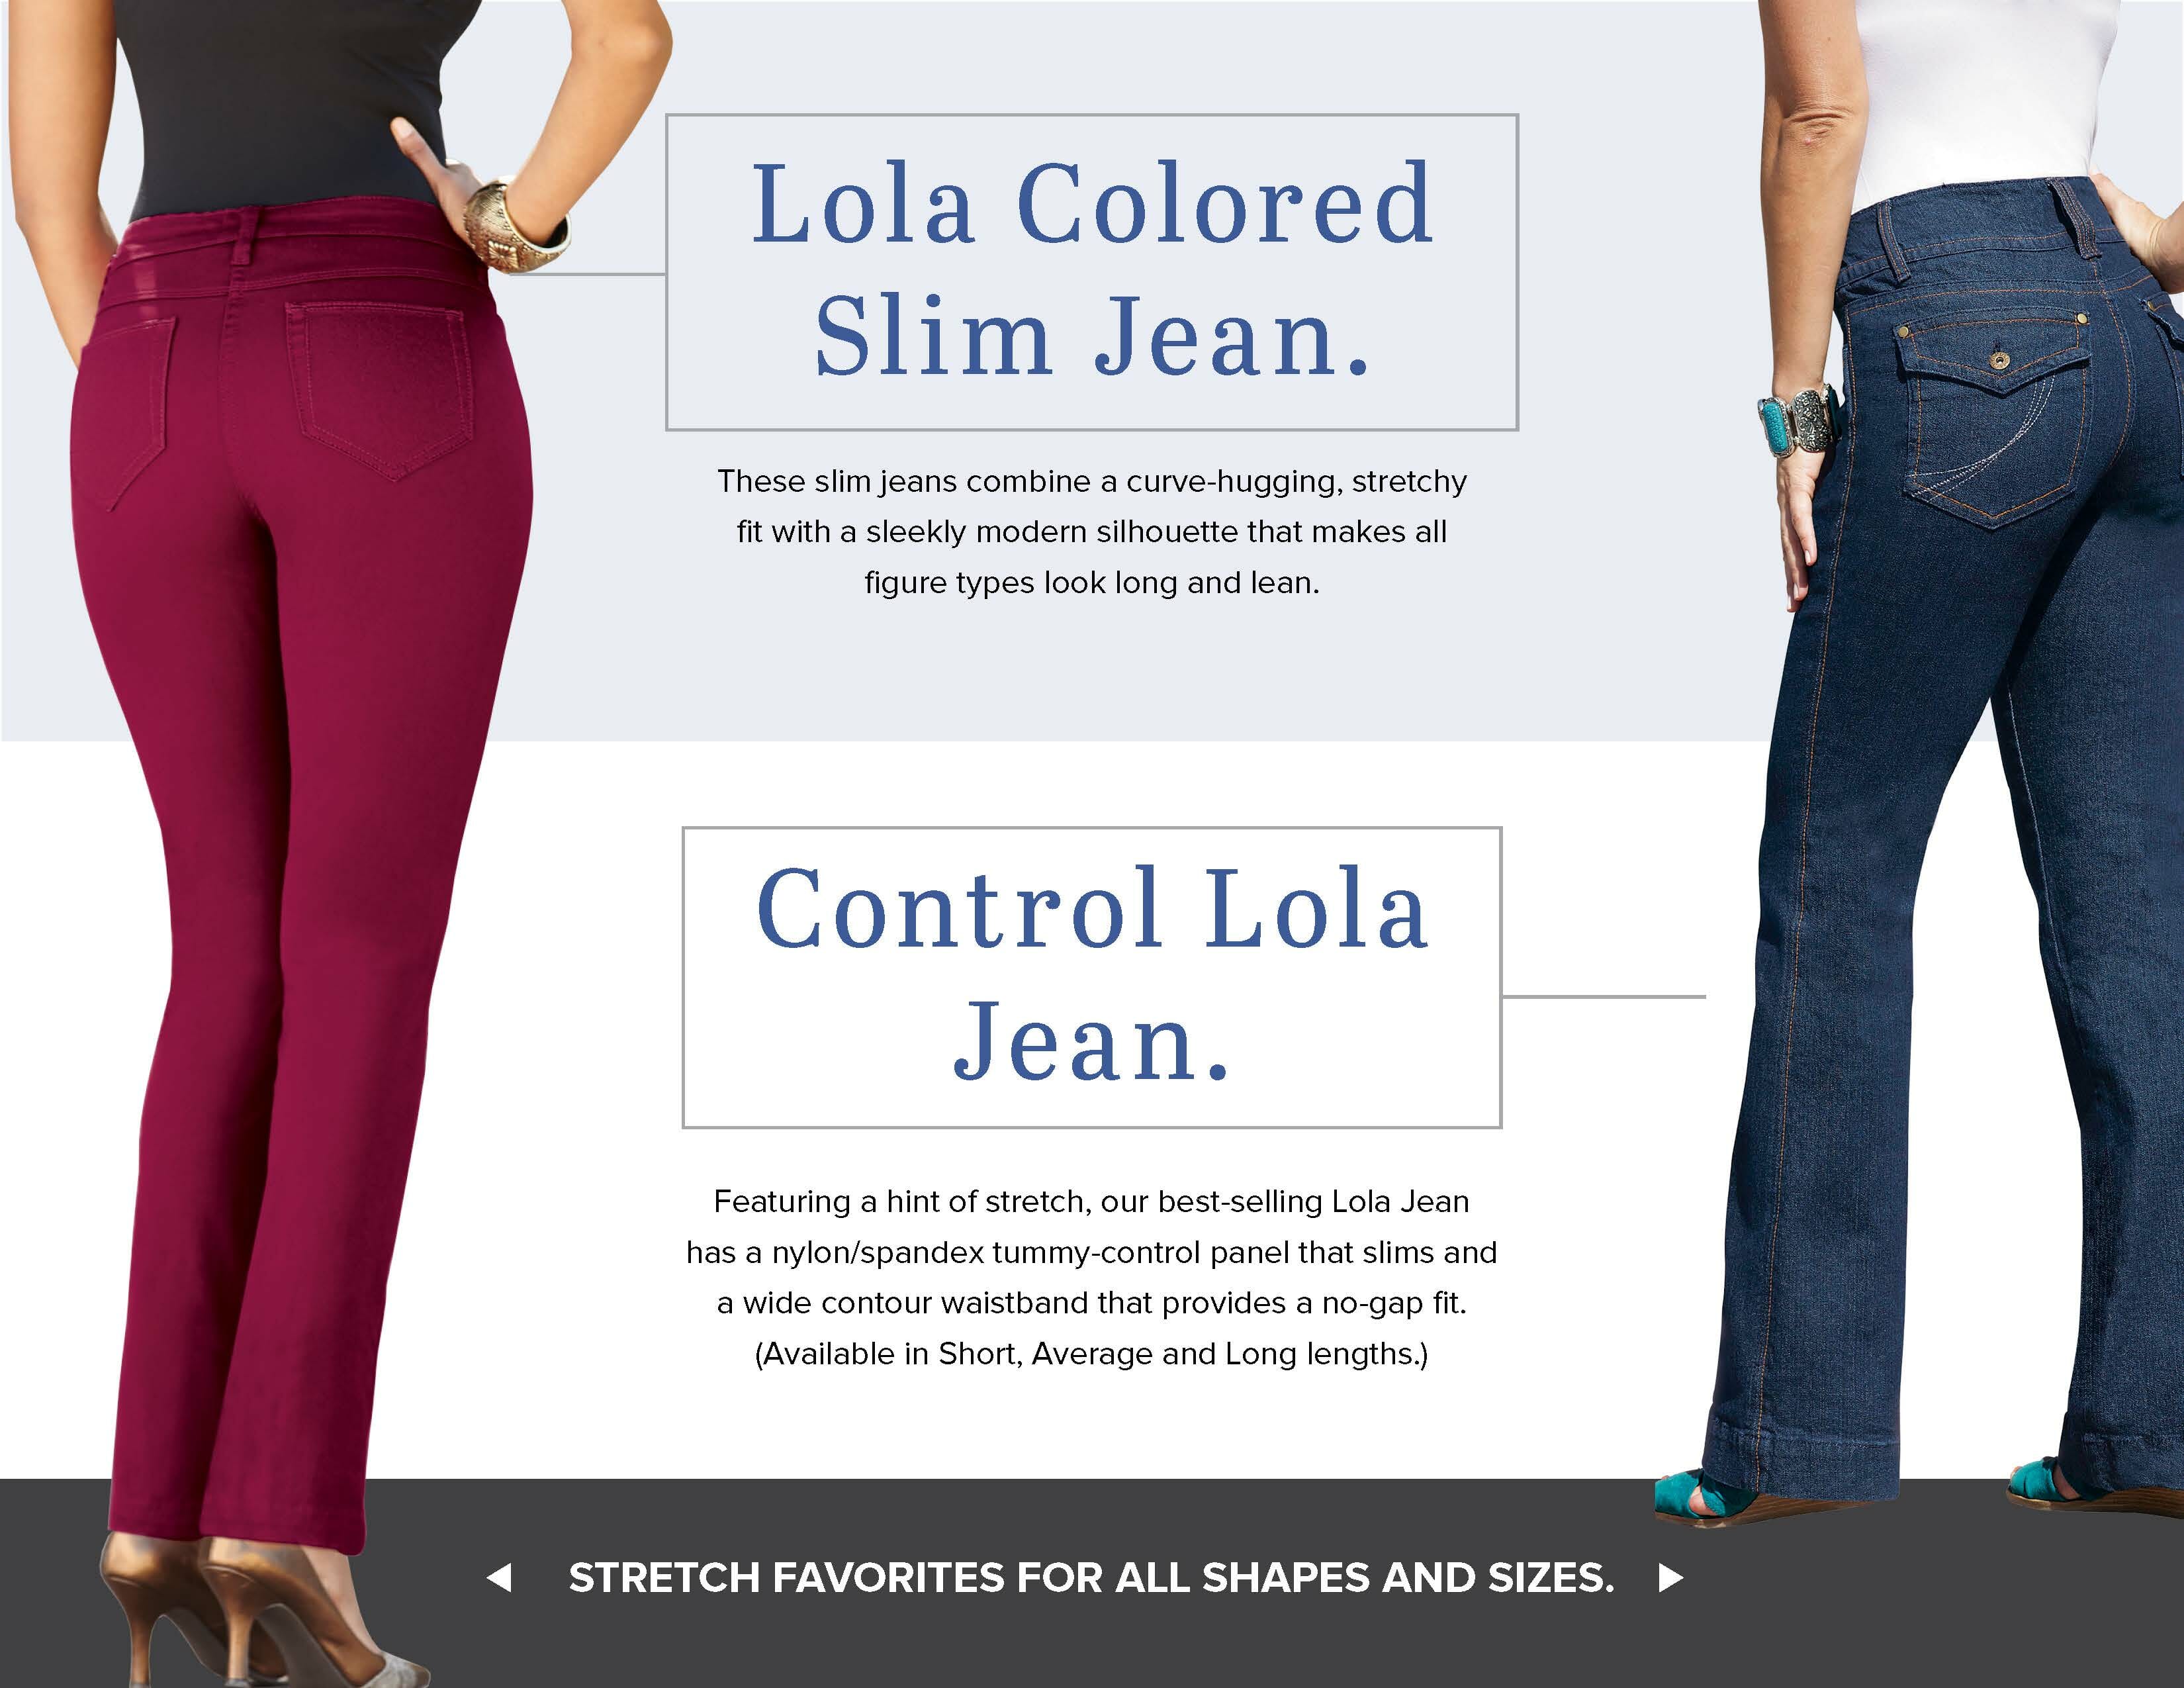 2 women; 1 in slim colored jeans and the other in control top